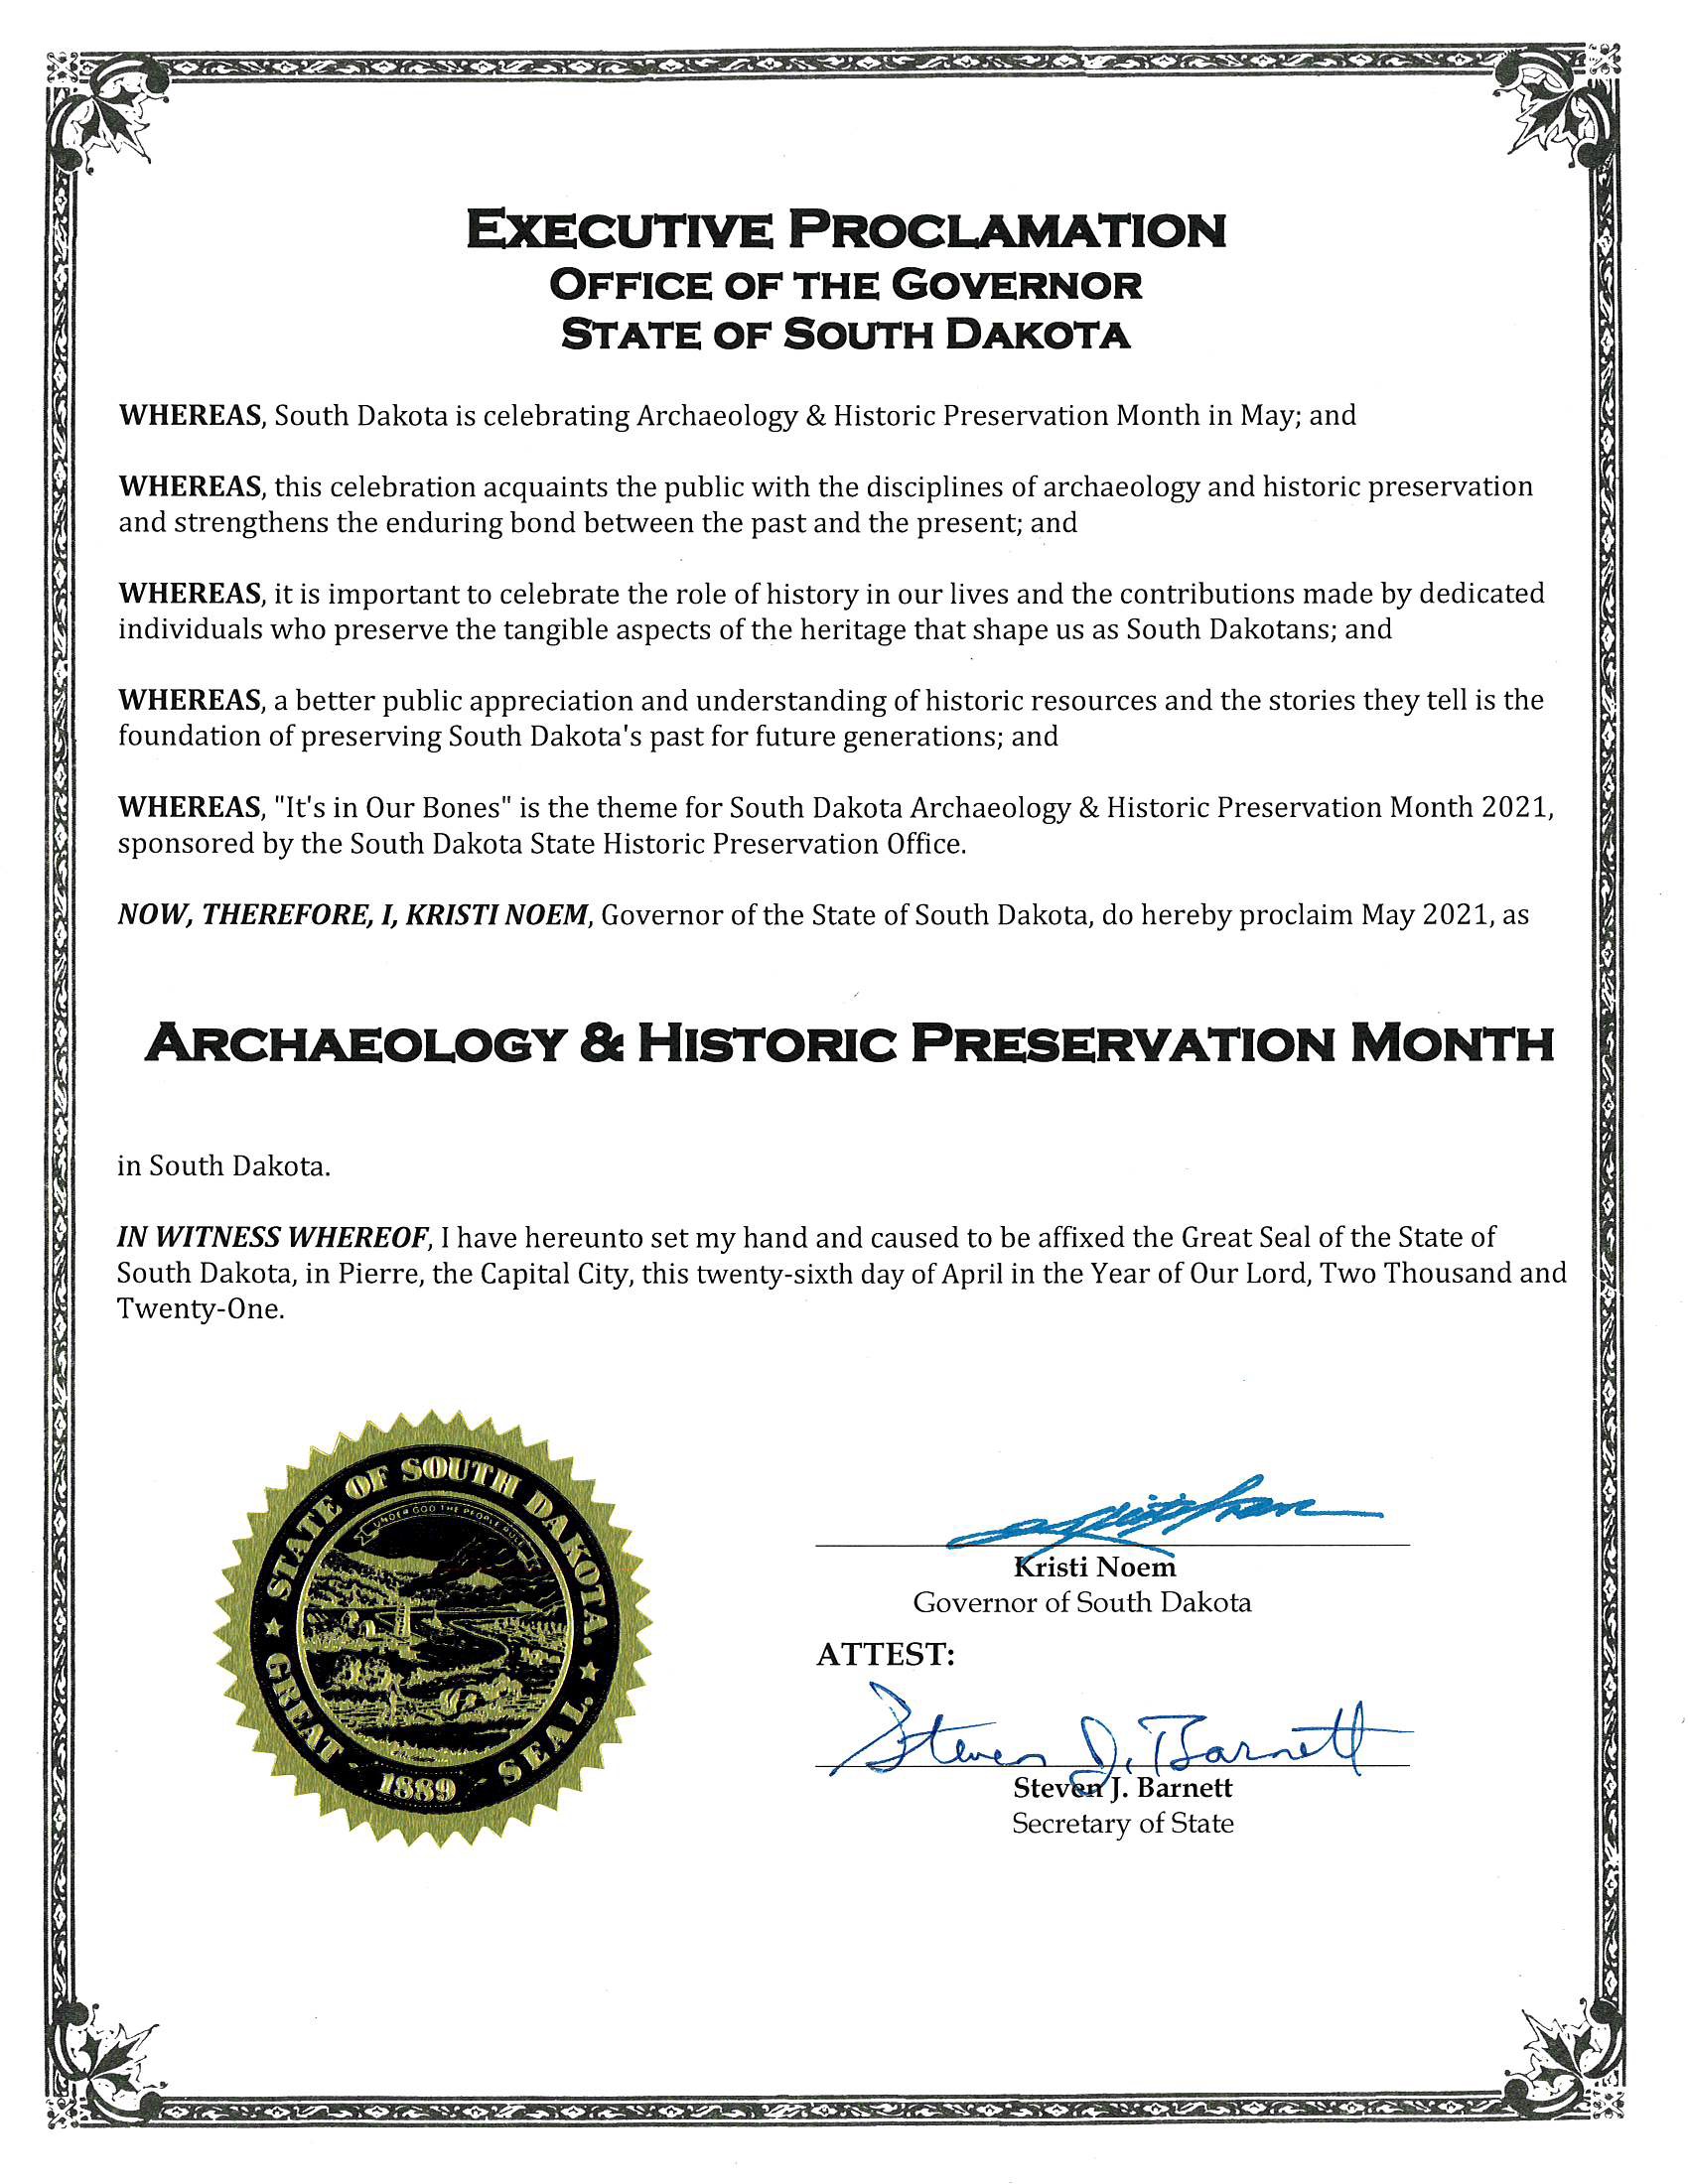 copy of the 2021 South Dakota Archaeology & Historic Preservation Month Executive Proclamation